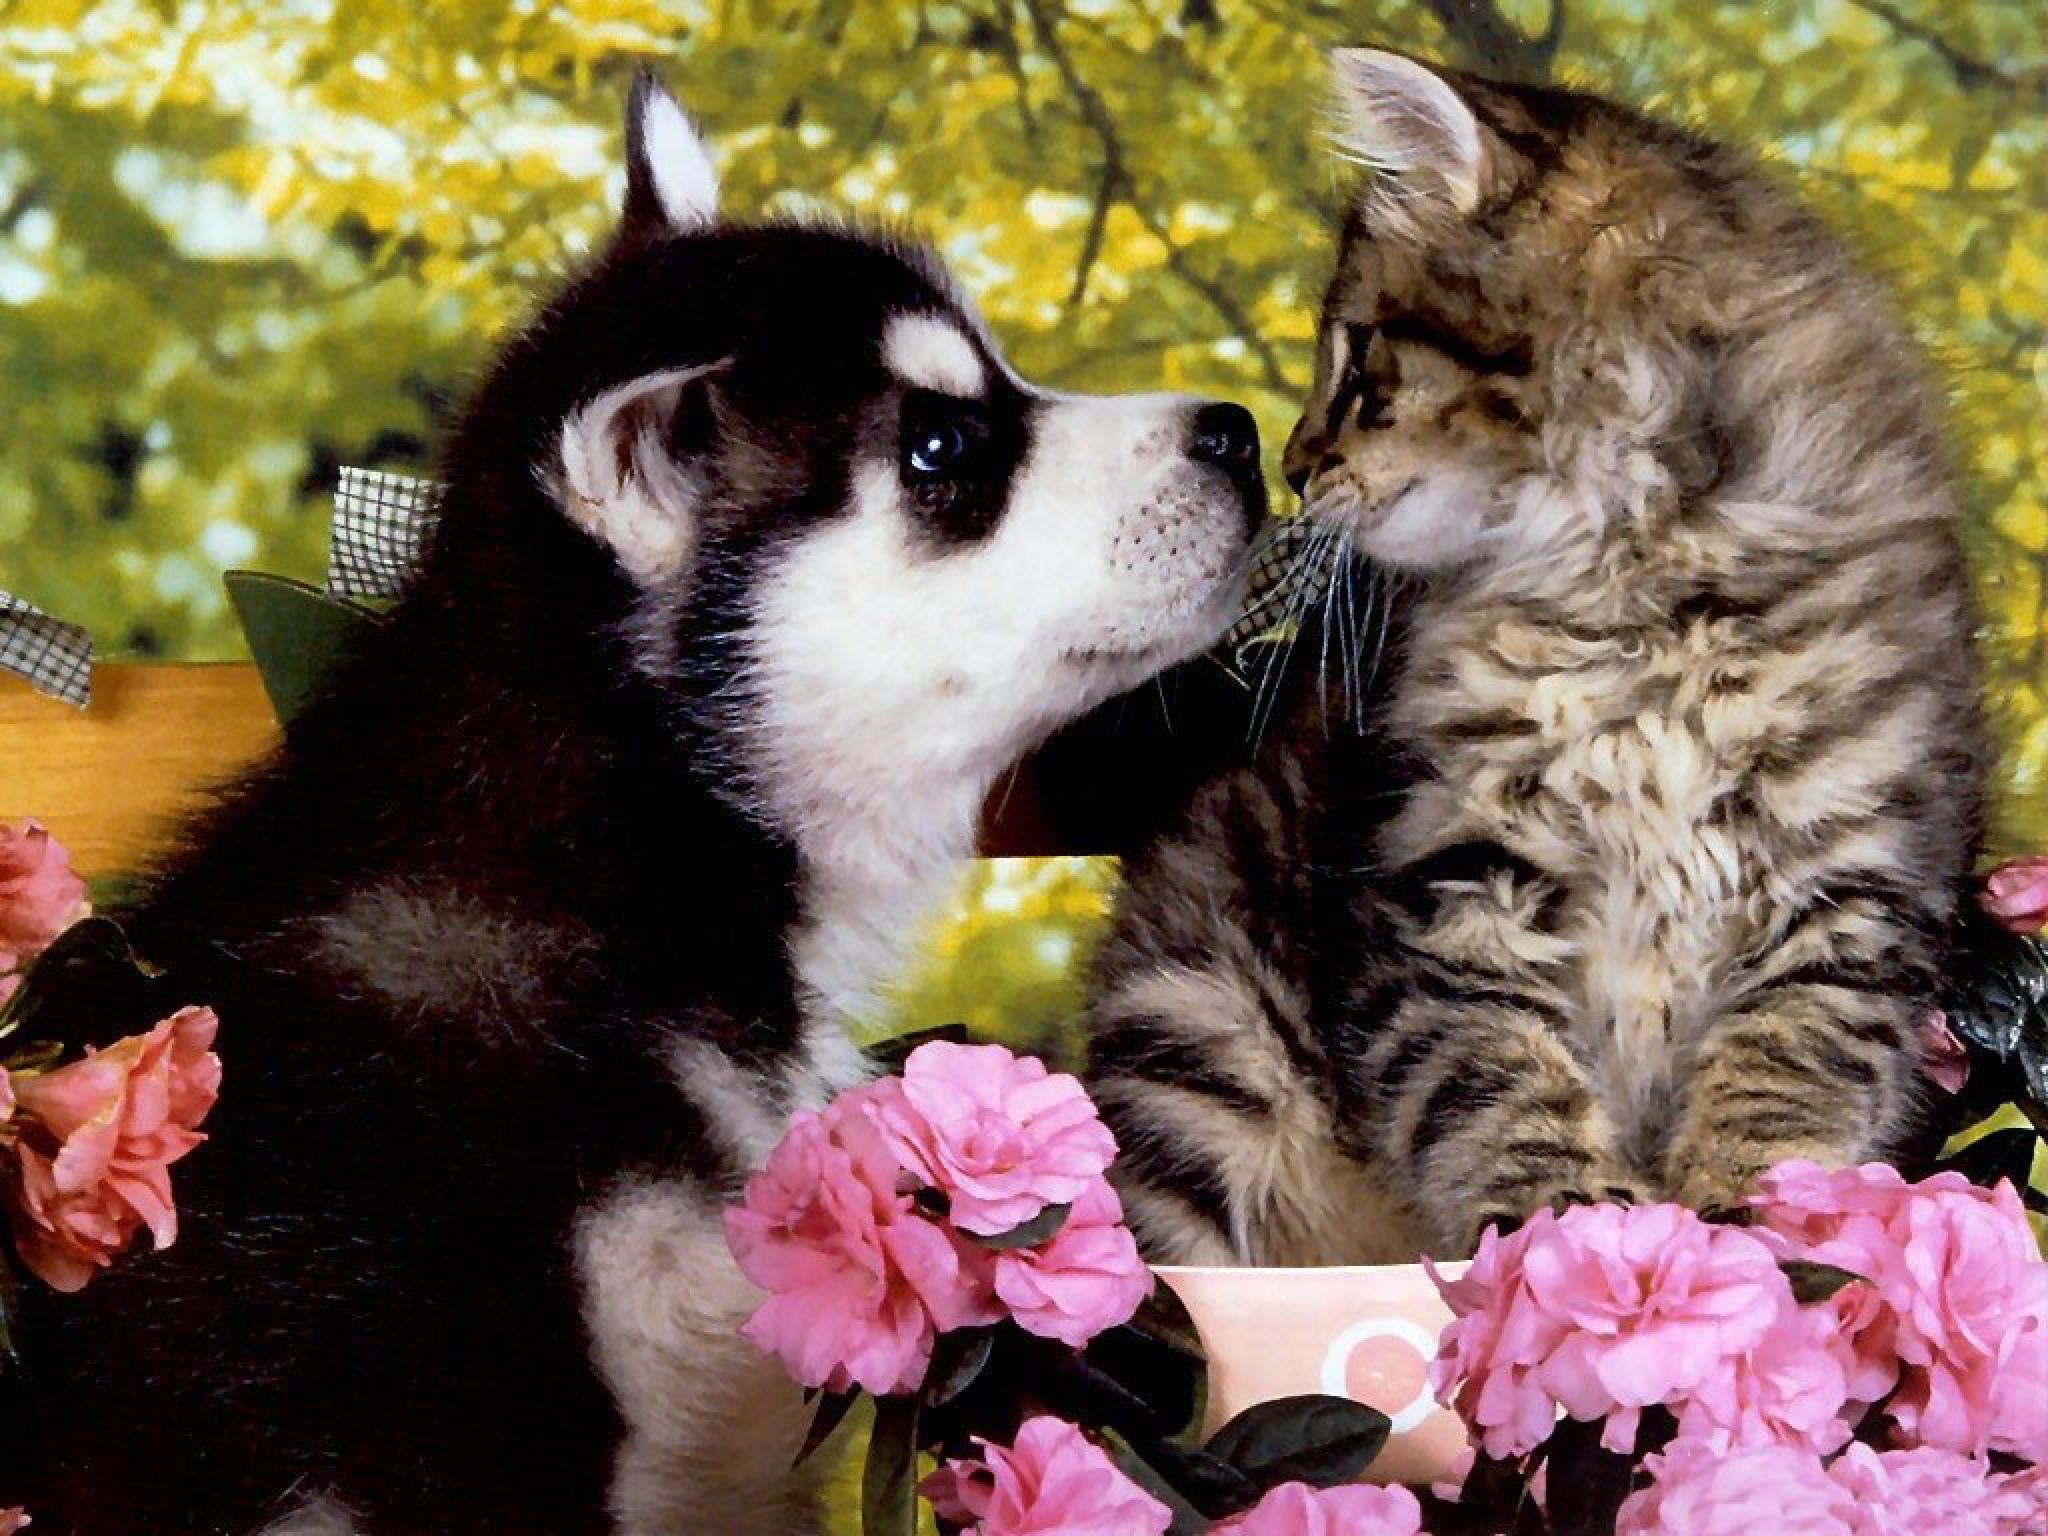 2048x1536 Cute friends - Puppies and kittens Wallpapers and Images - Desktop .